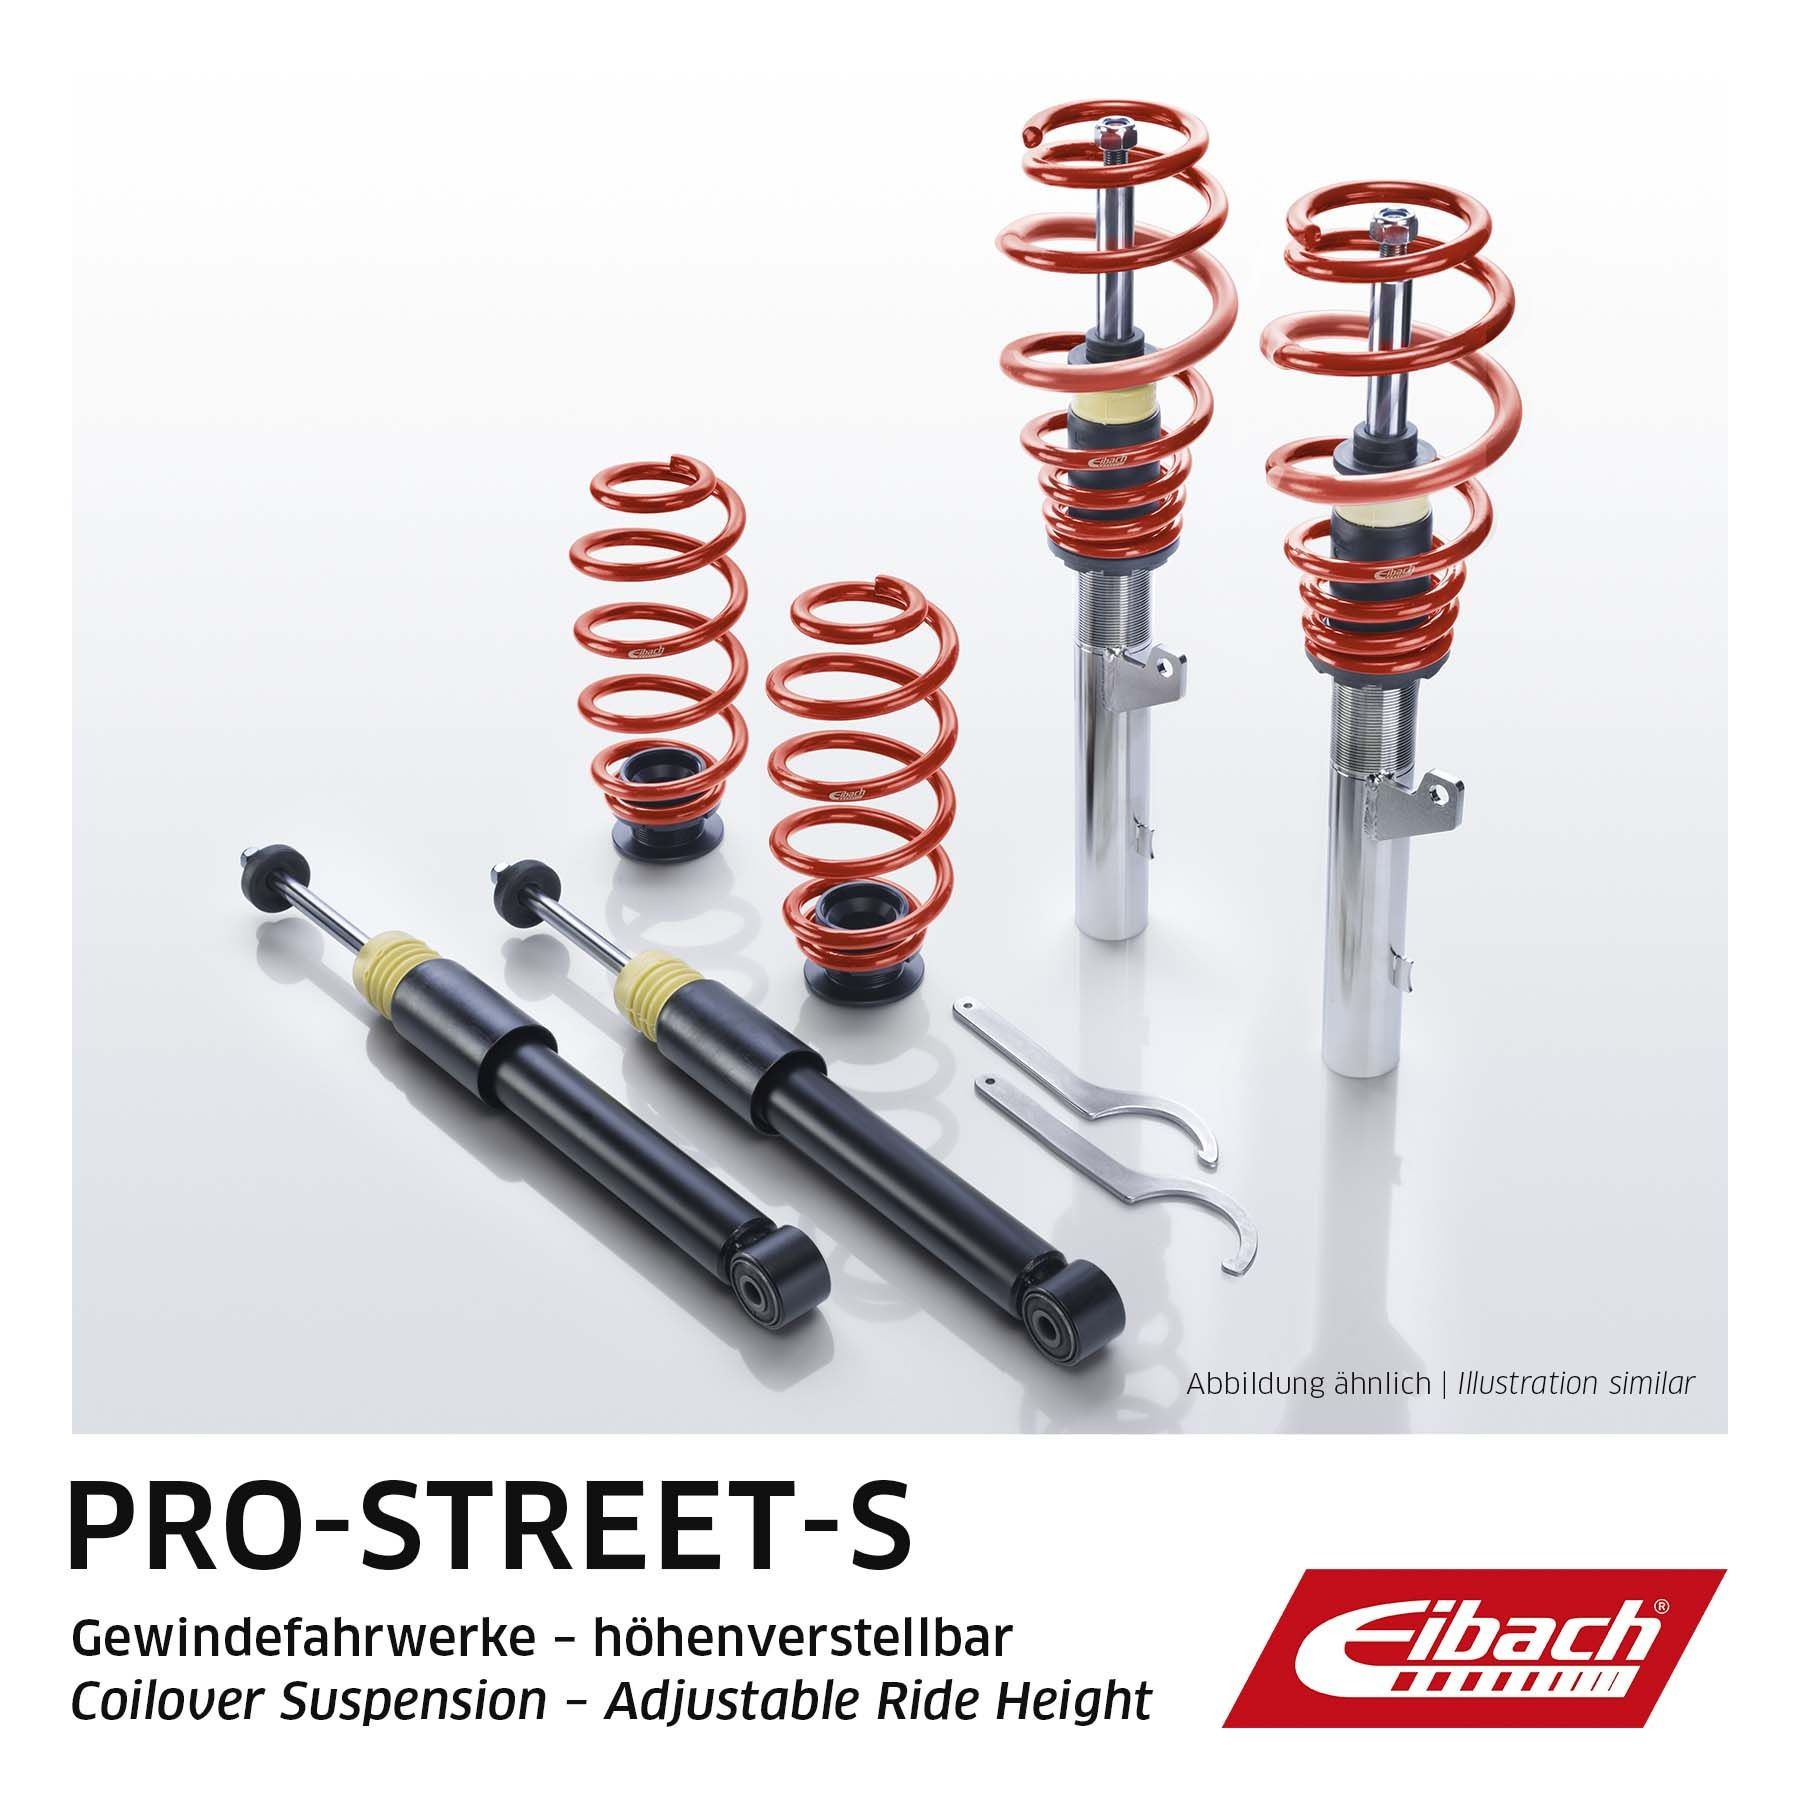 65150110322 EIBACH Pro-Street-S PSS65-15-011-03-22 Suspension kit, coil springs / shock absorbers price